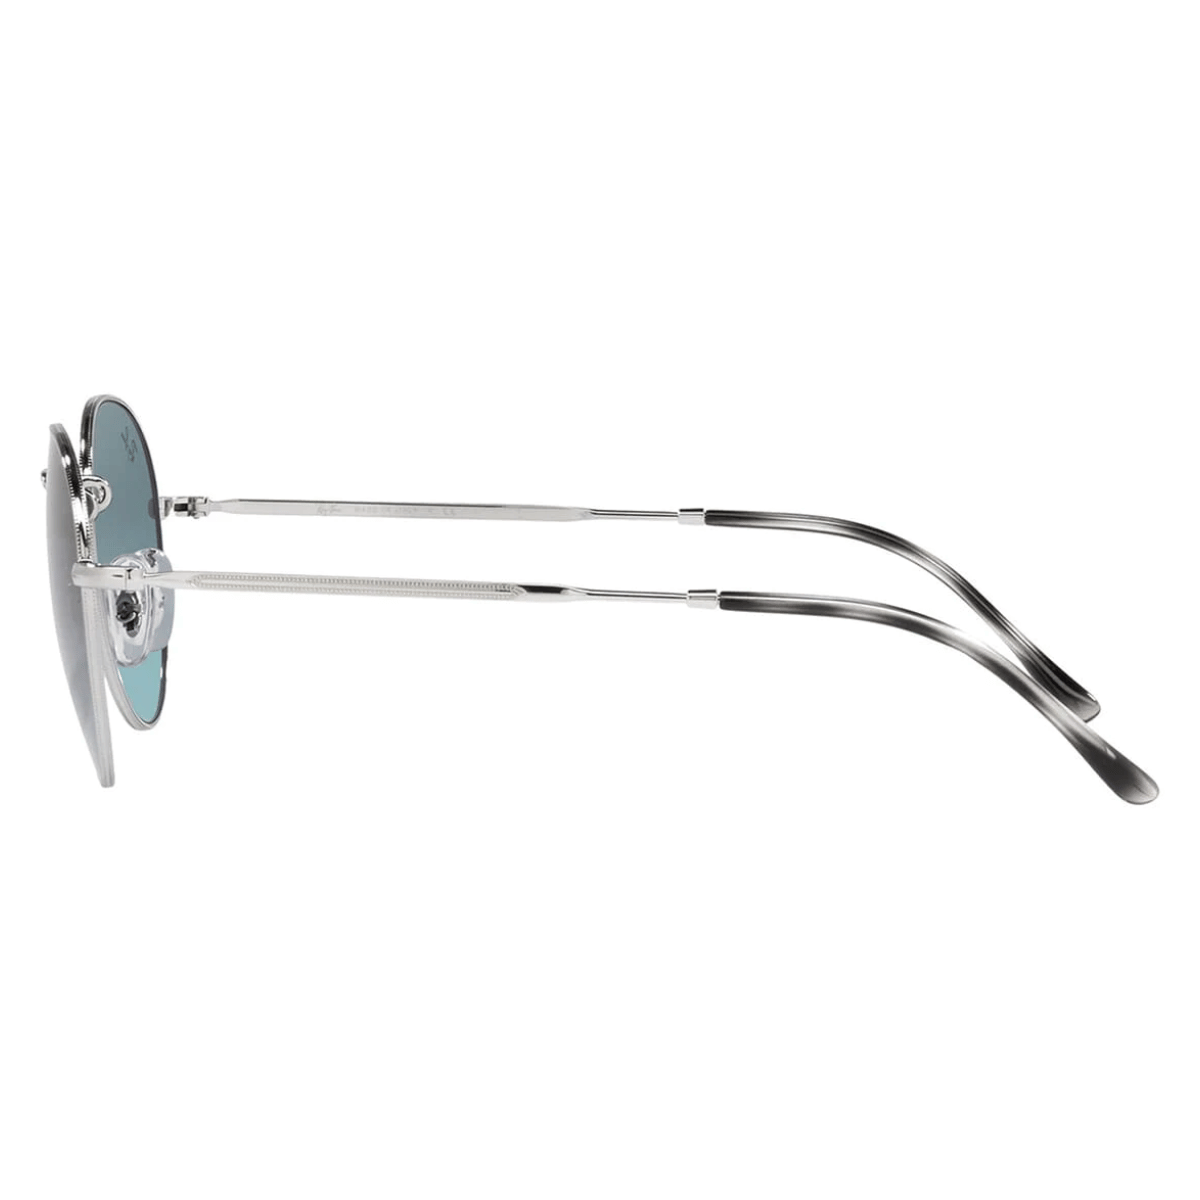 "Rayban RB3582 Sunglass: Shop now at Optorium for this chic eyewear option. The polished silver frame and vibrant Rayban blue shades make it a must-have accessory for both men and women."